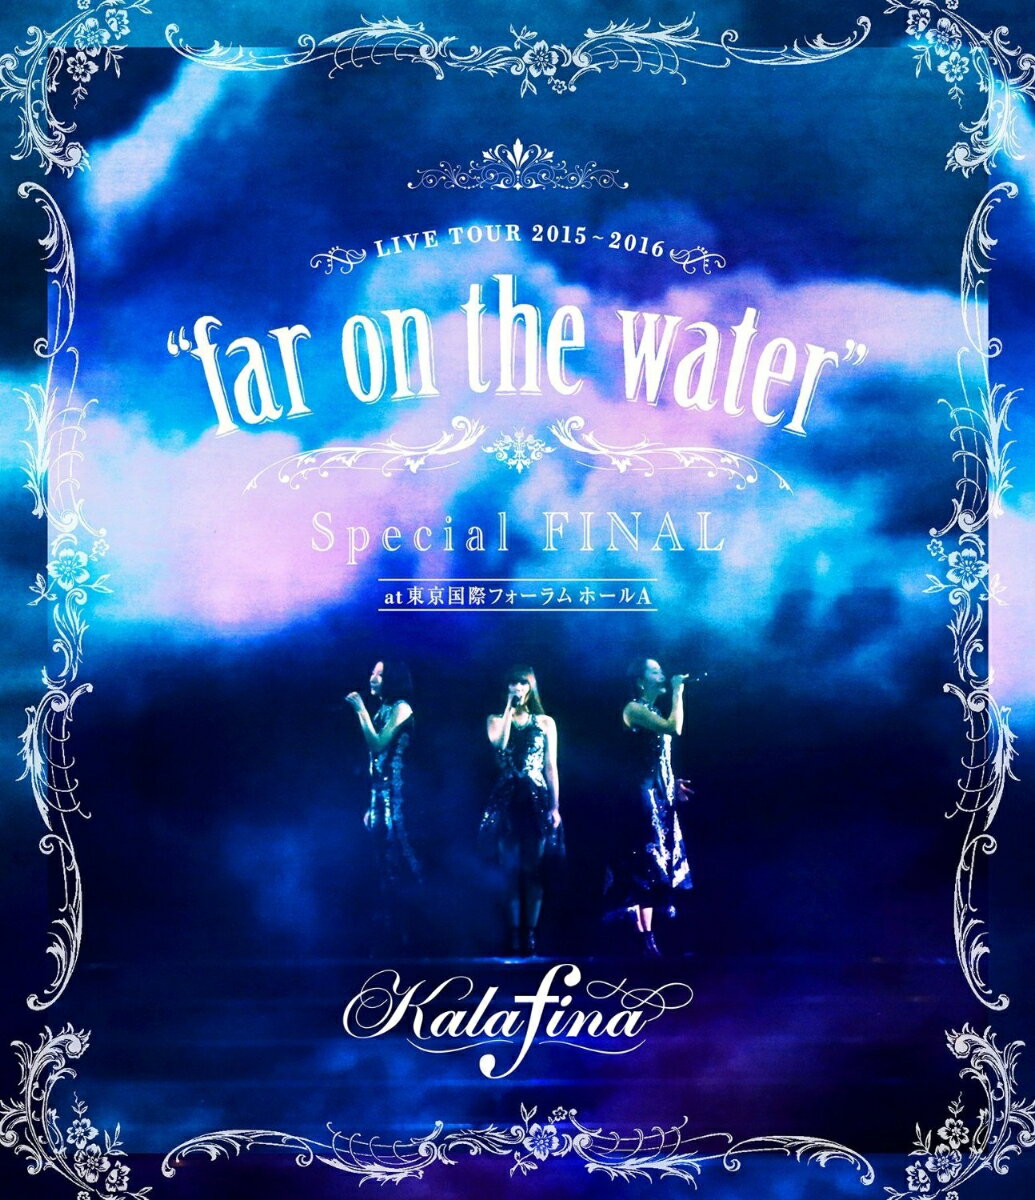 Kalafina LIVE TOUR 2015〜2016 “far on the water” Special FINAL at 東京国際フォーラムホールA【Blu-ray】